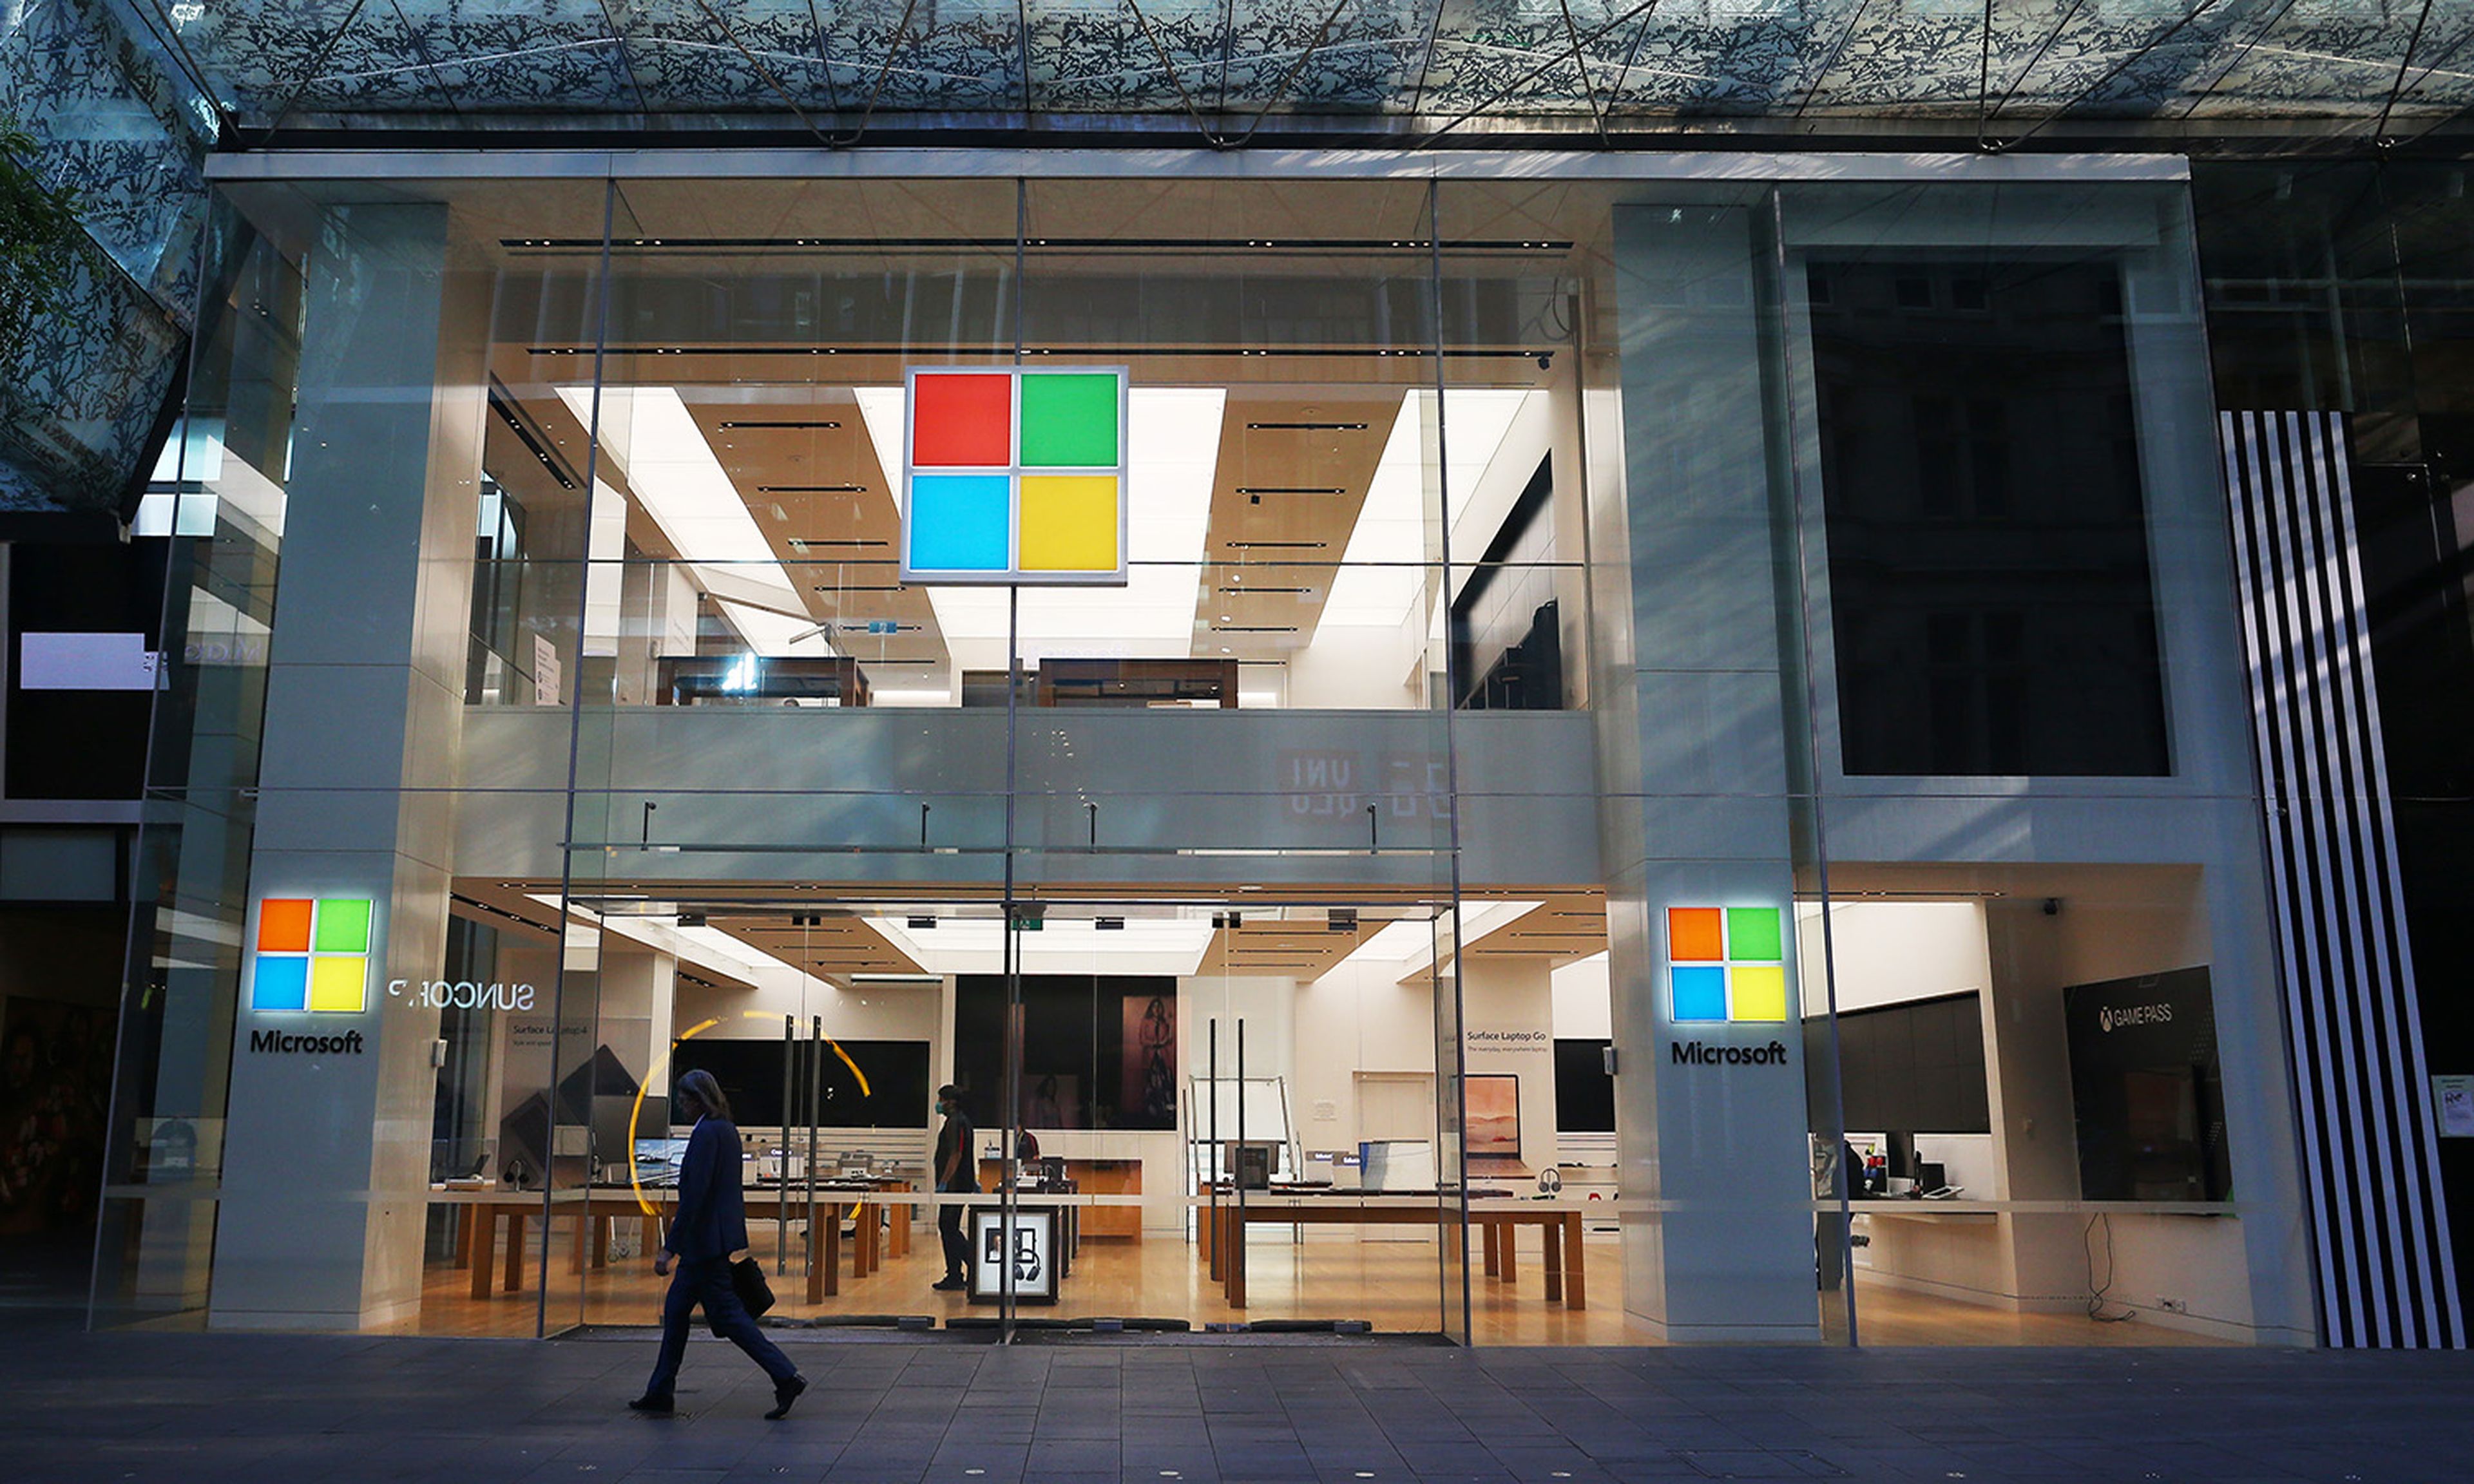 A pedestrian moves past a Microsoft store in the usually bustling Pitt Street shopping mall on Oct. 6, 2021, in Sydney, Australia. (Photo by Lisa Maree Williams/Getty Images)